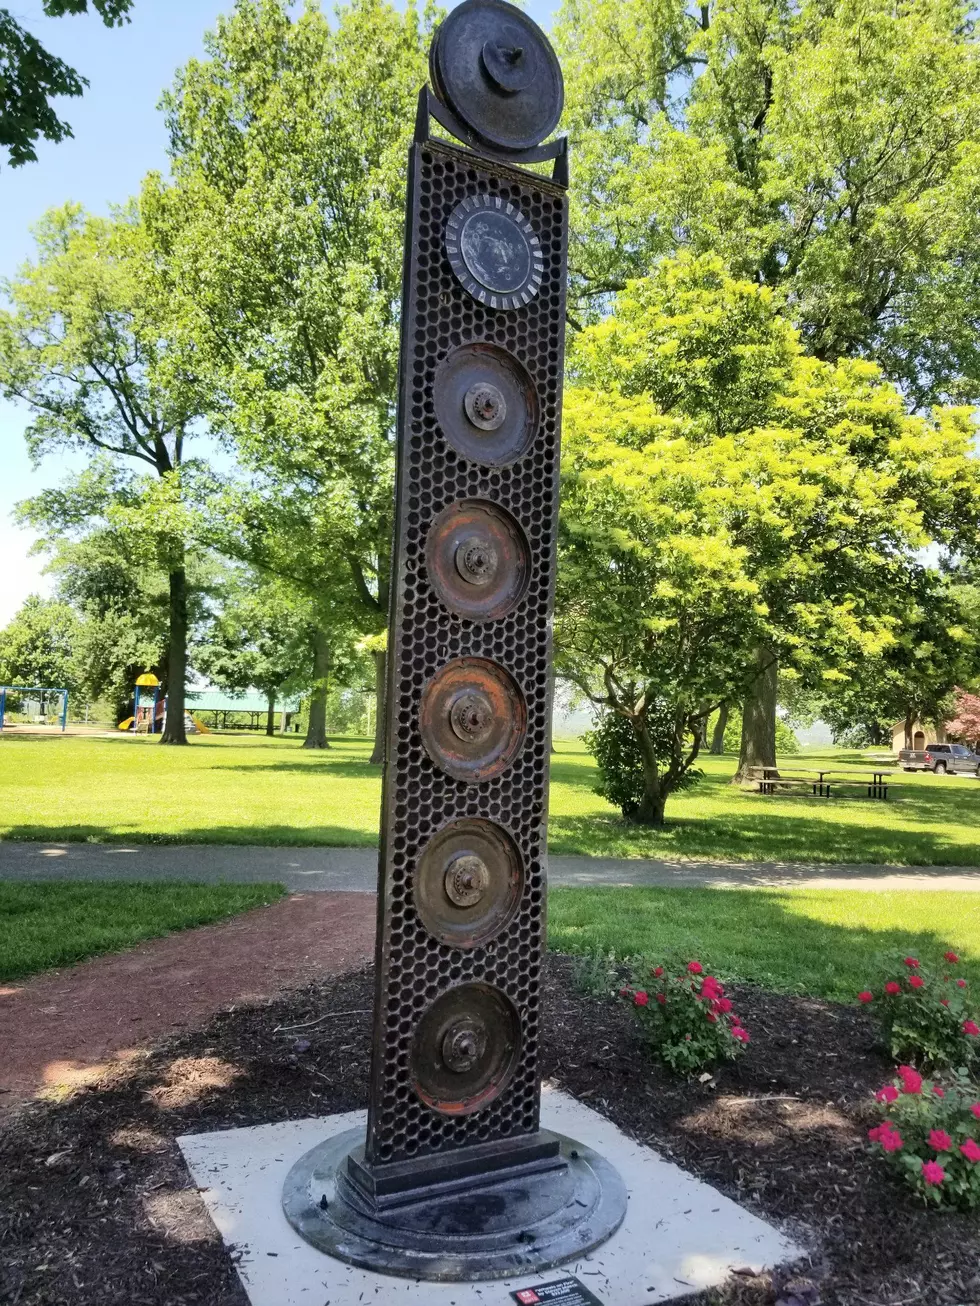 QC Arts Installs Cool New Sculptures All Around Town! Are There Any Near You?